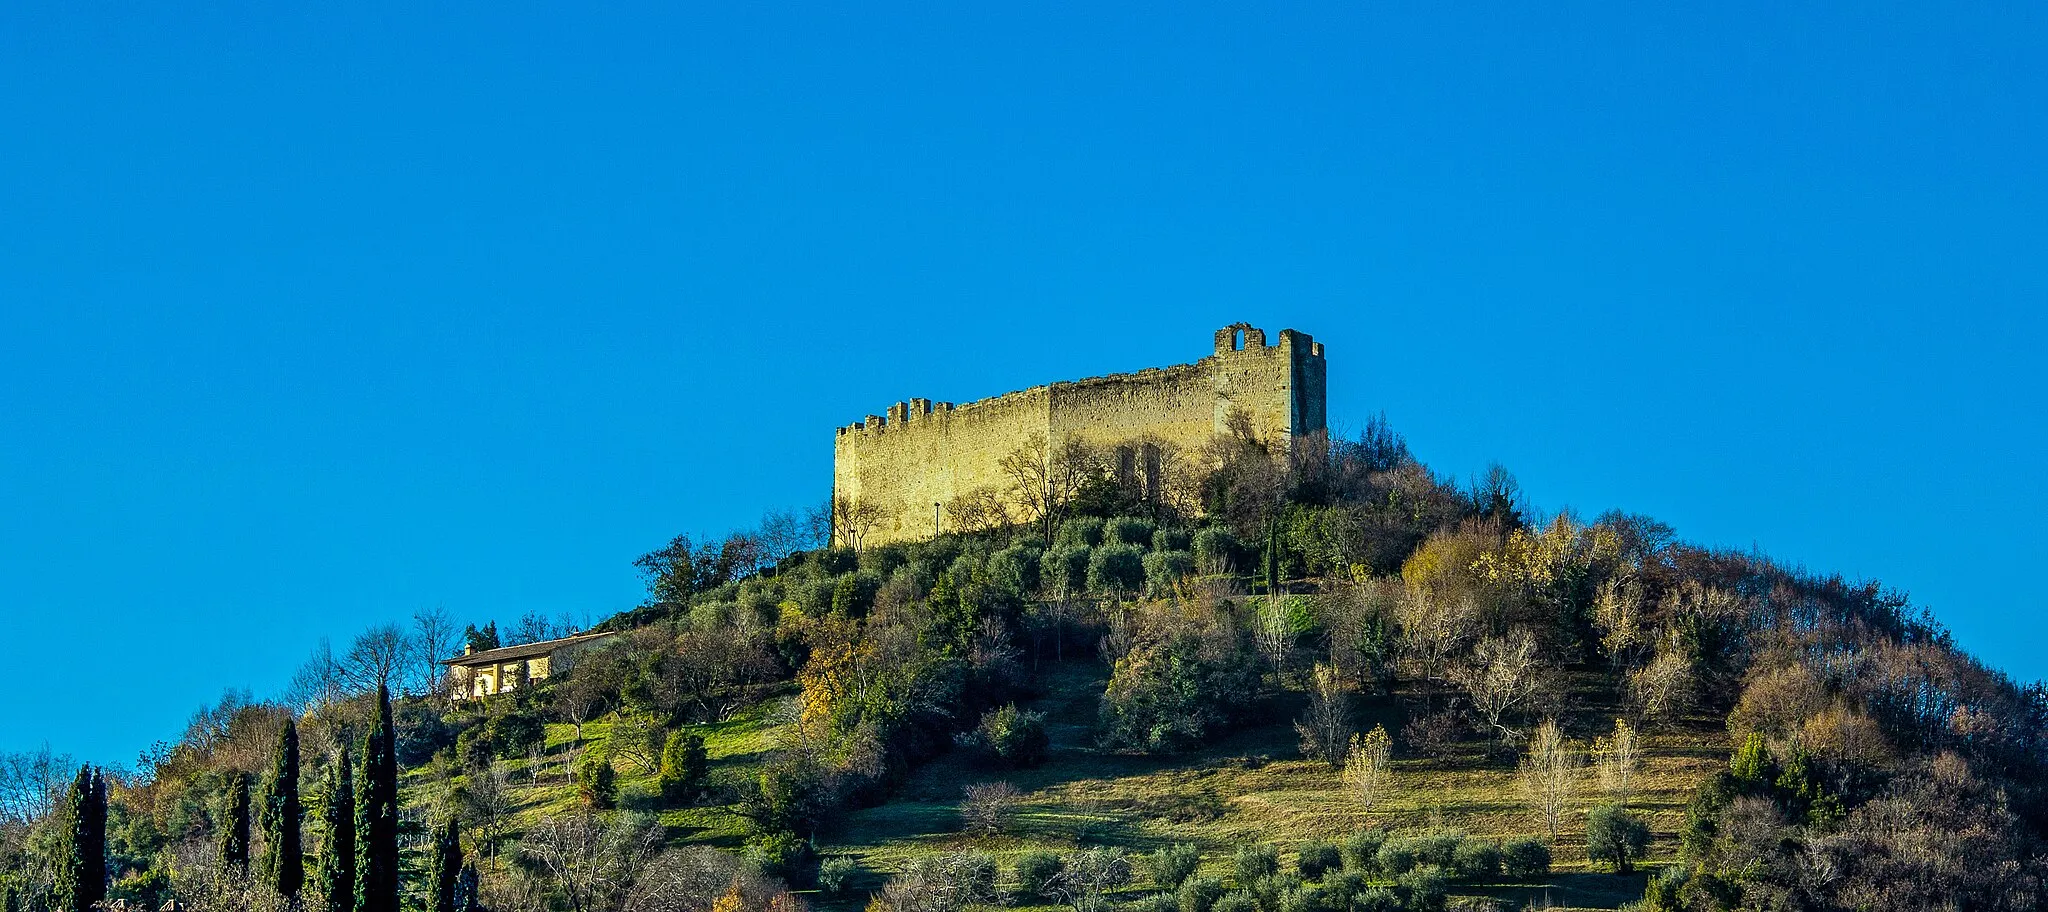 Photo showing: Nestling in an enchanting hilly landscape, Asolo is one of the best-known and loveliest villages in Italy. Asolo "the city of a hundred horizons", in the picture the Asolo's fortress over Mount Ricco, its date of construction is placed between the end of the twelfth century and the beginning of the thirteenth century.